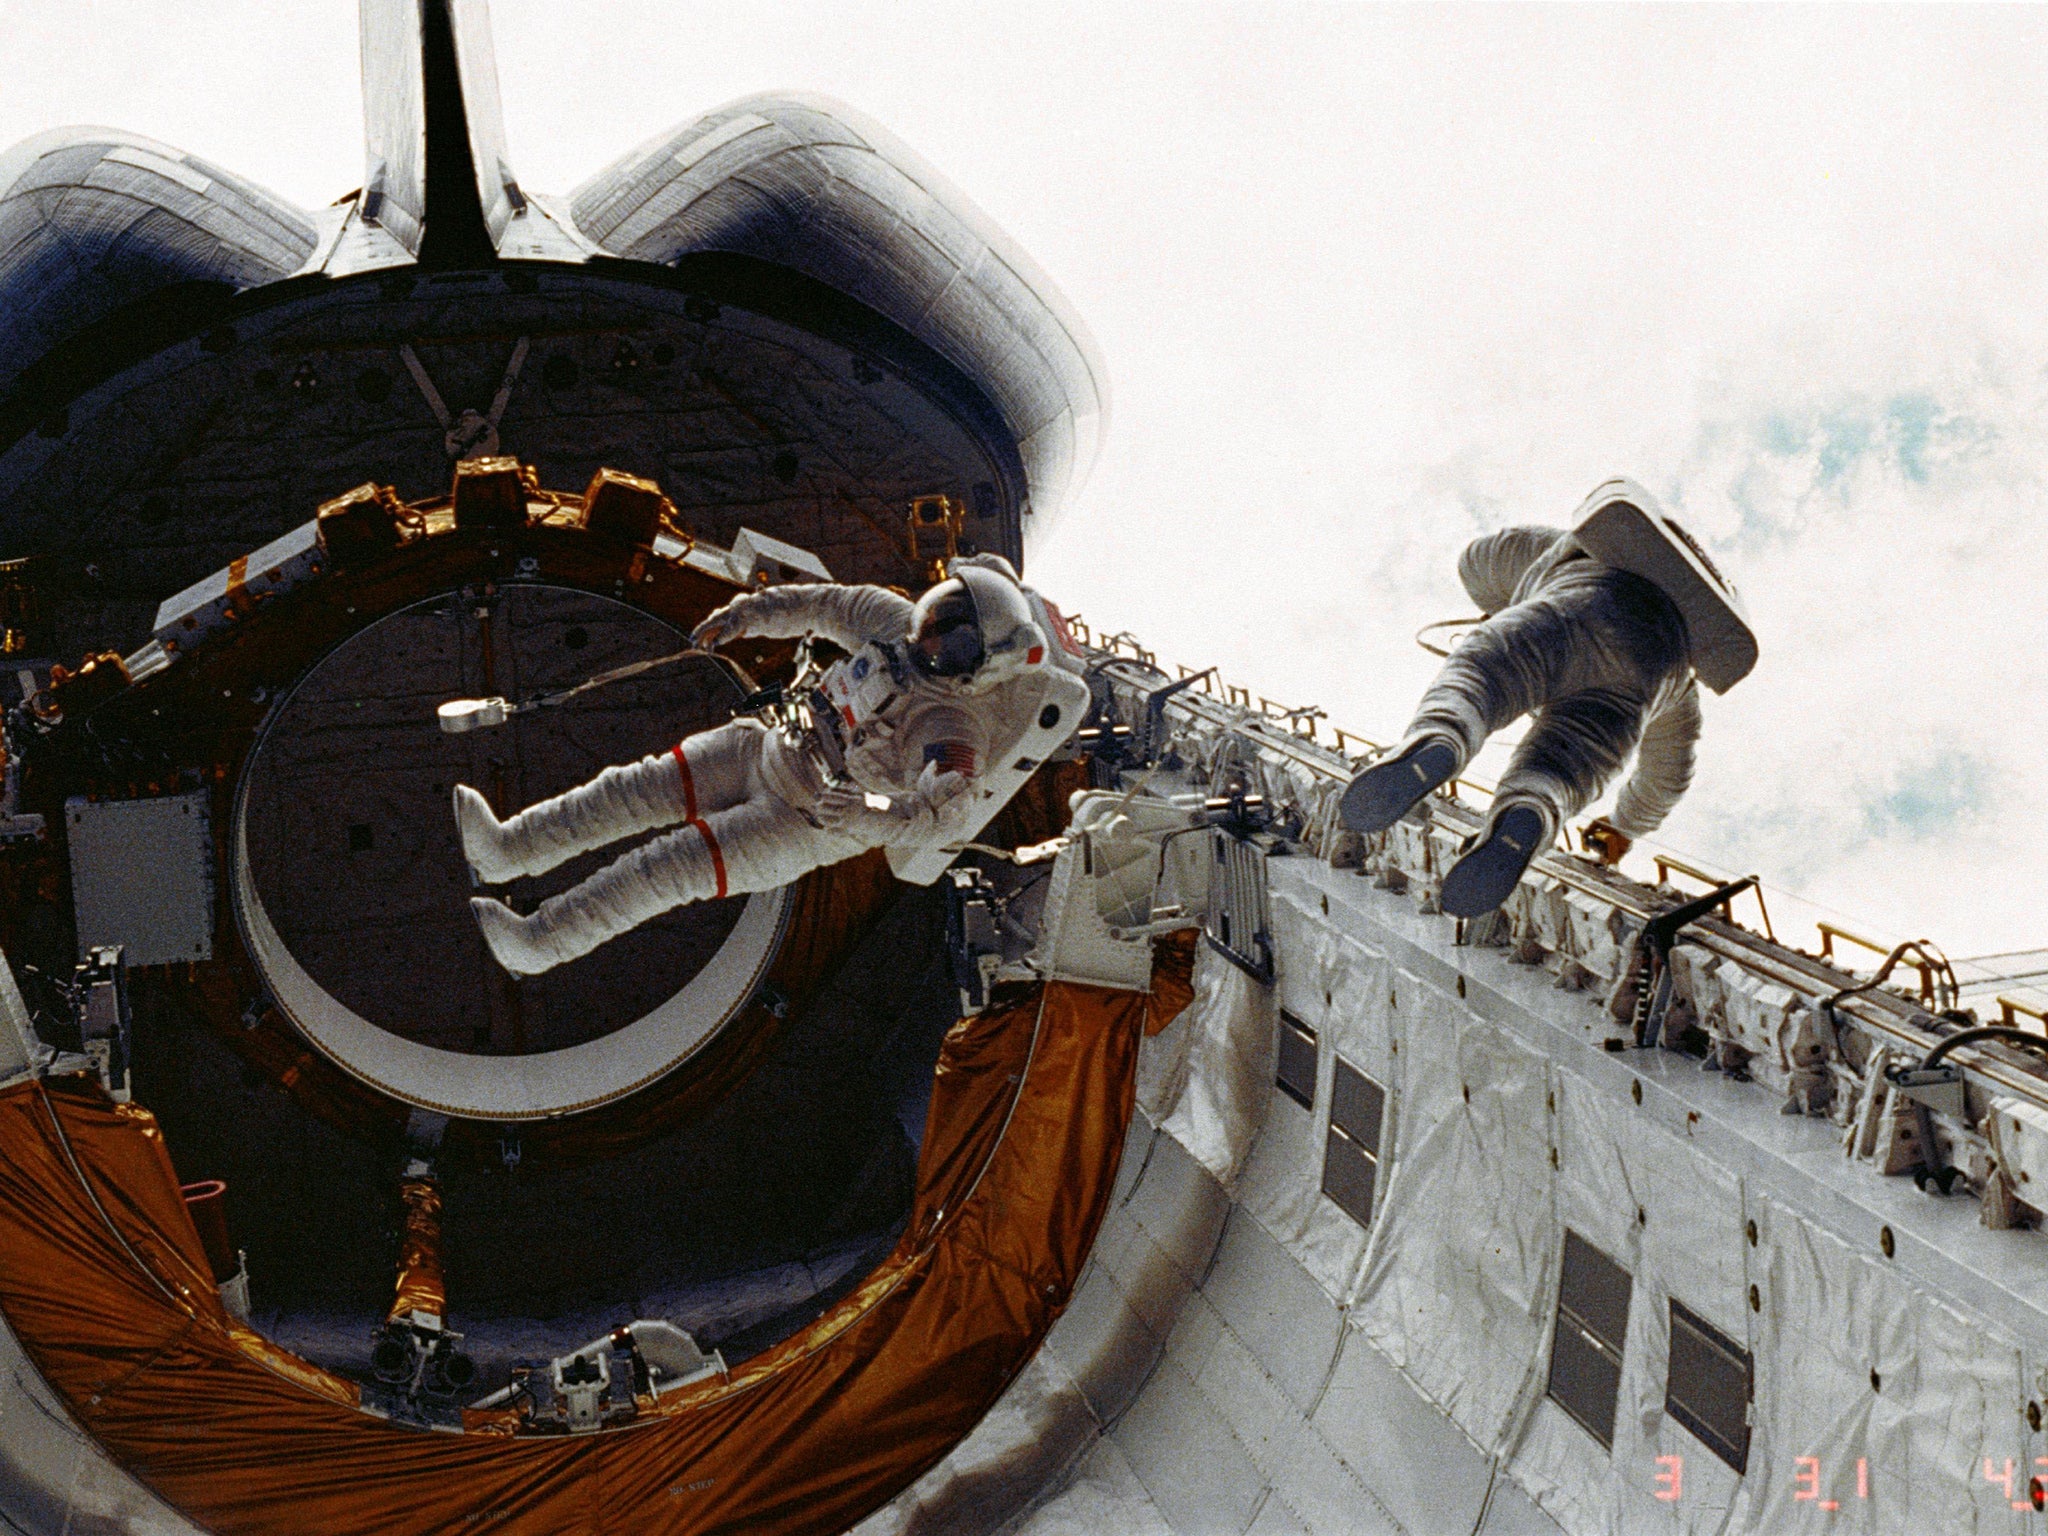 Don Peterson, right, floats in the cargo bay of the space shuttle Challenger in 1983